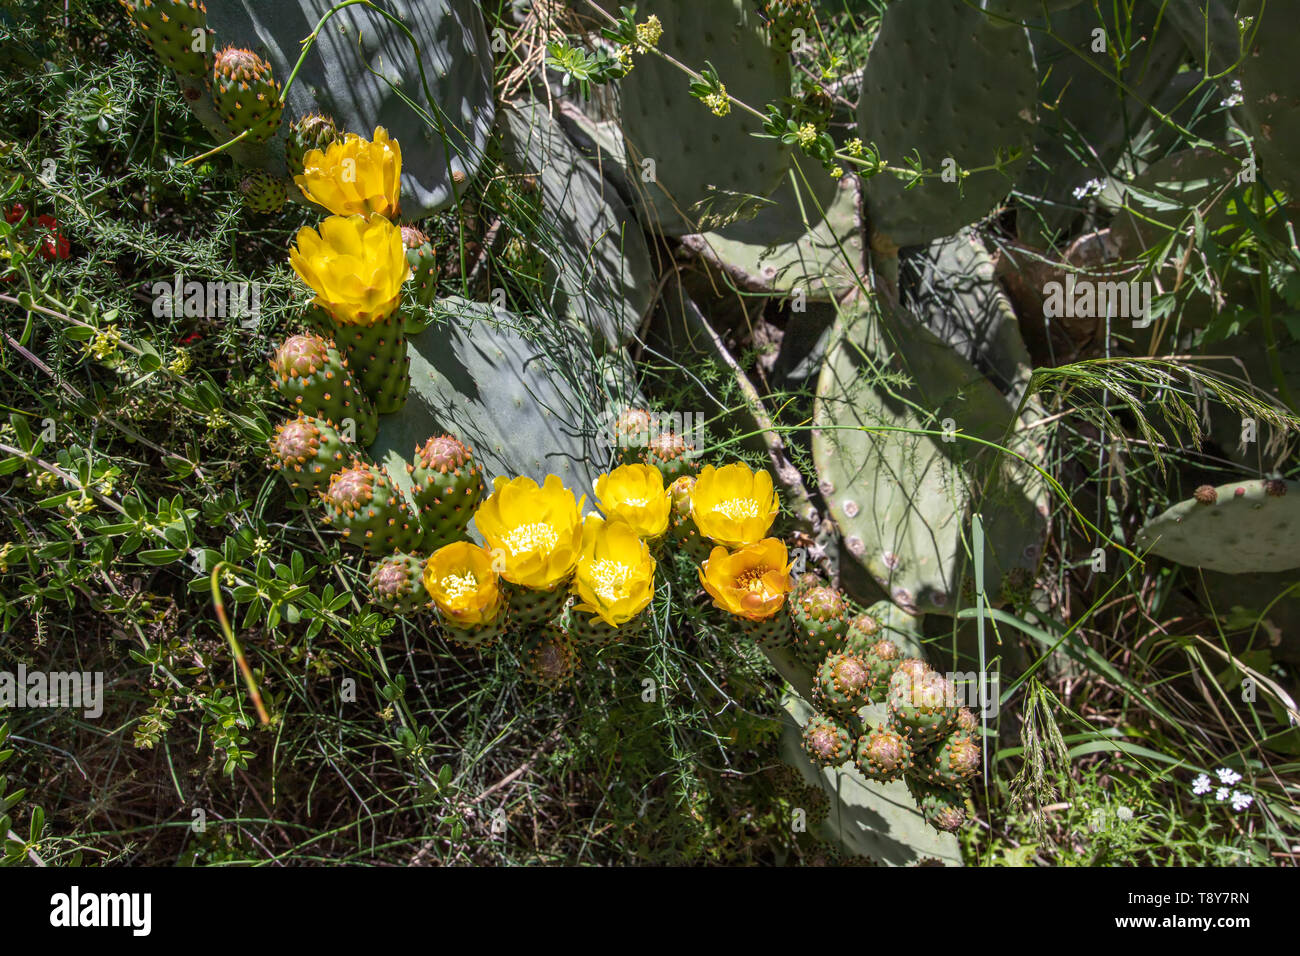 Sabra cactus buds and flowers against a blurry background of prickly thickets closeup Stock Photo